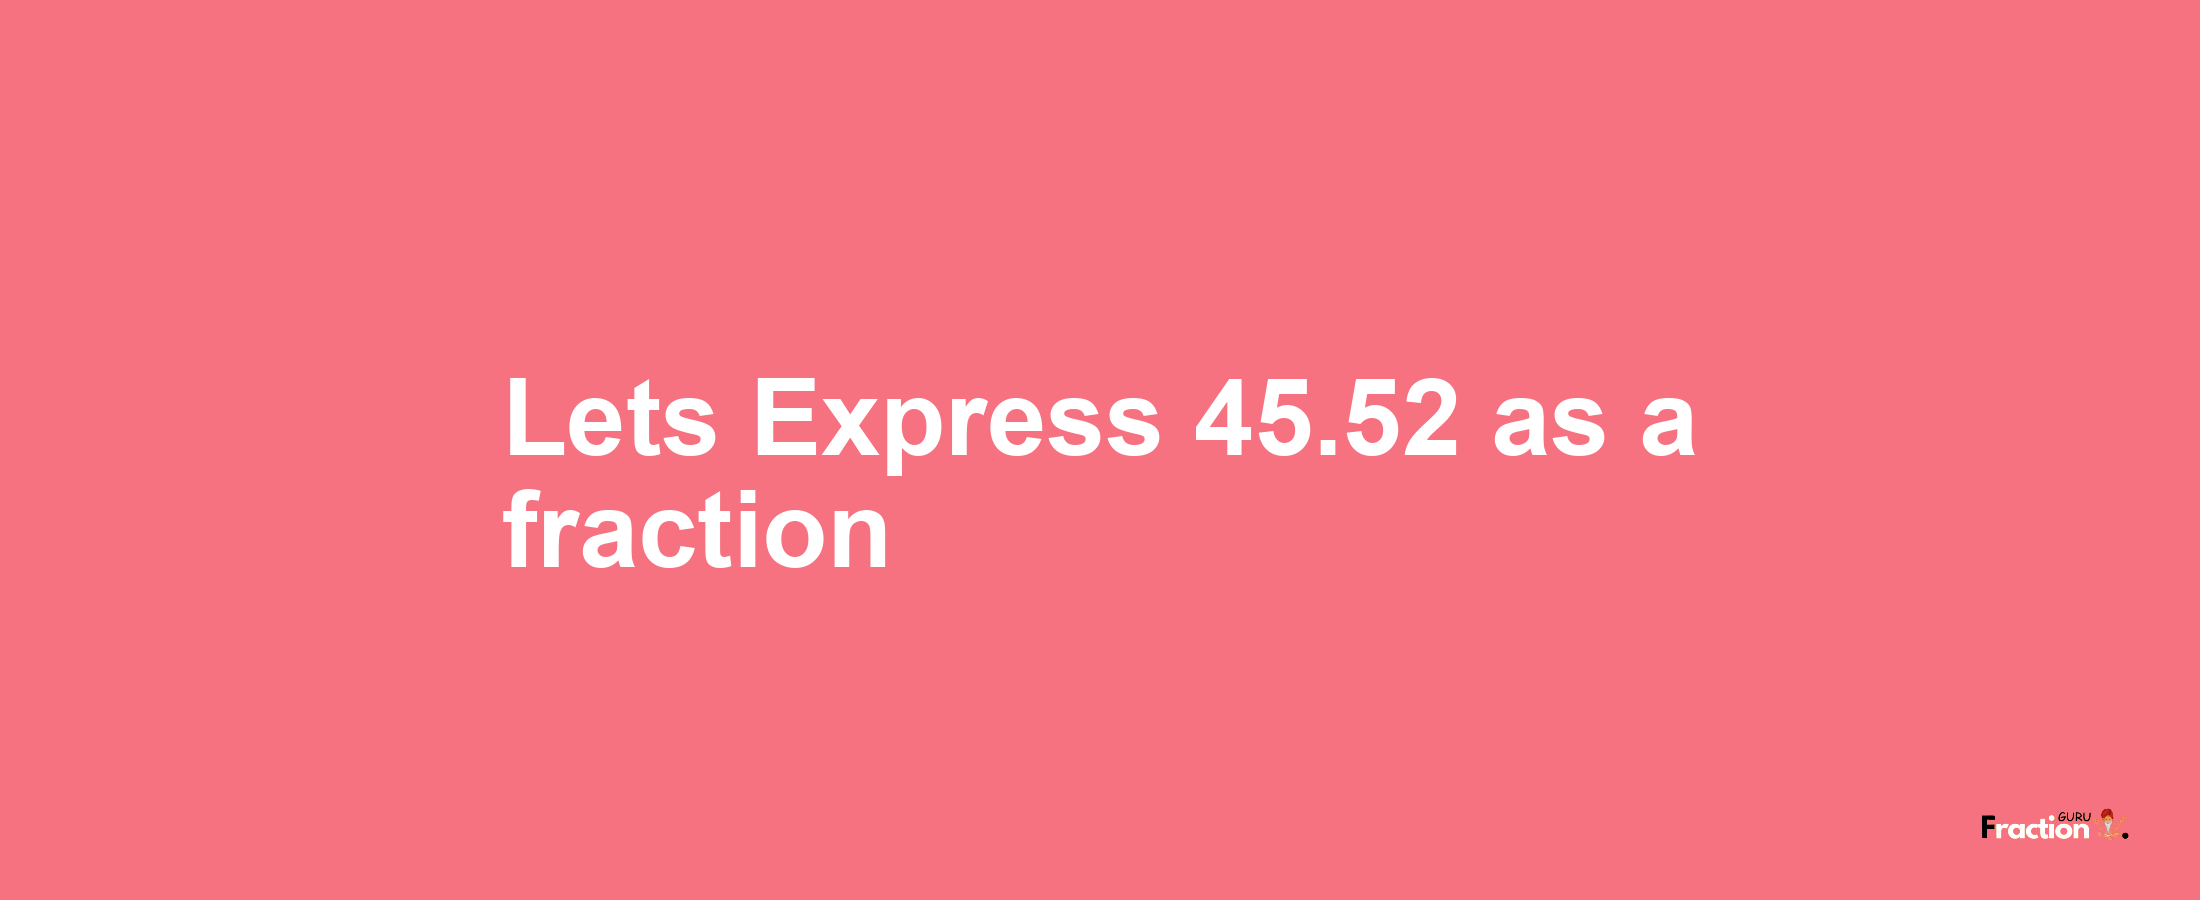 Lets Express 45.52 as afraction